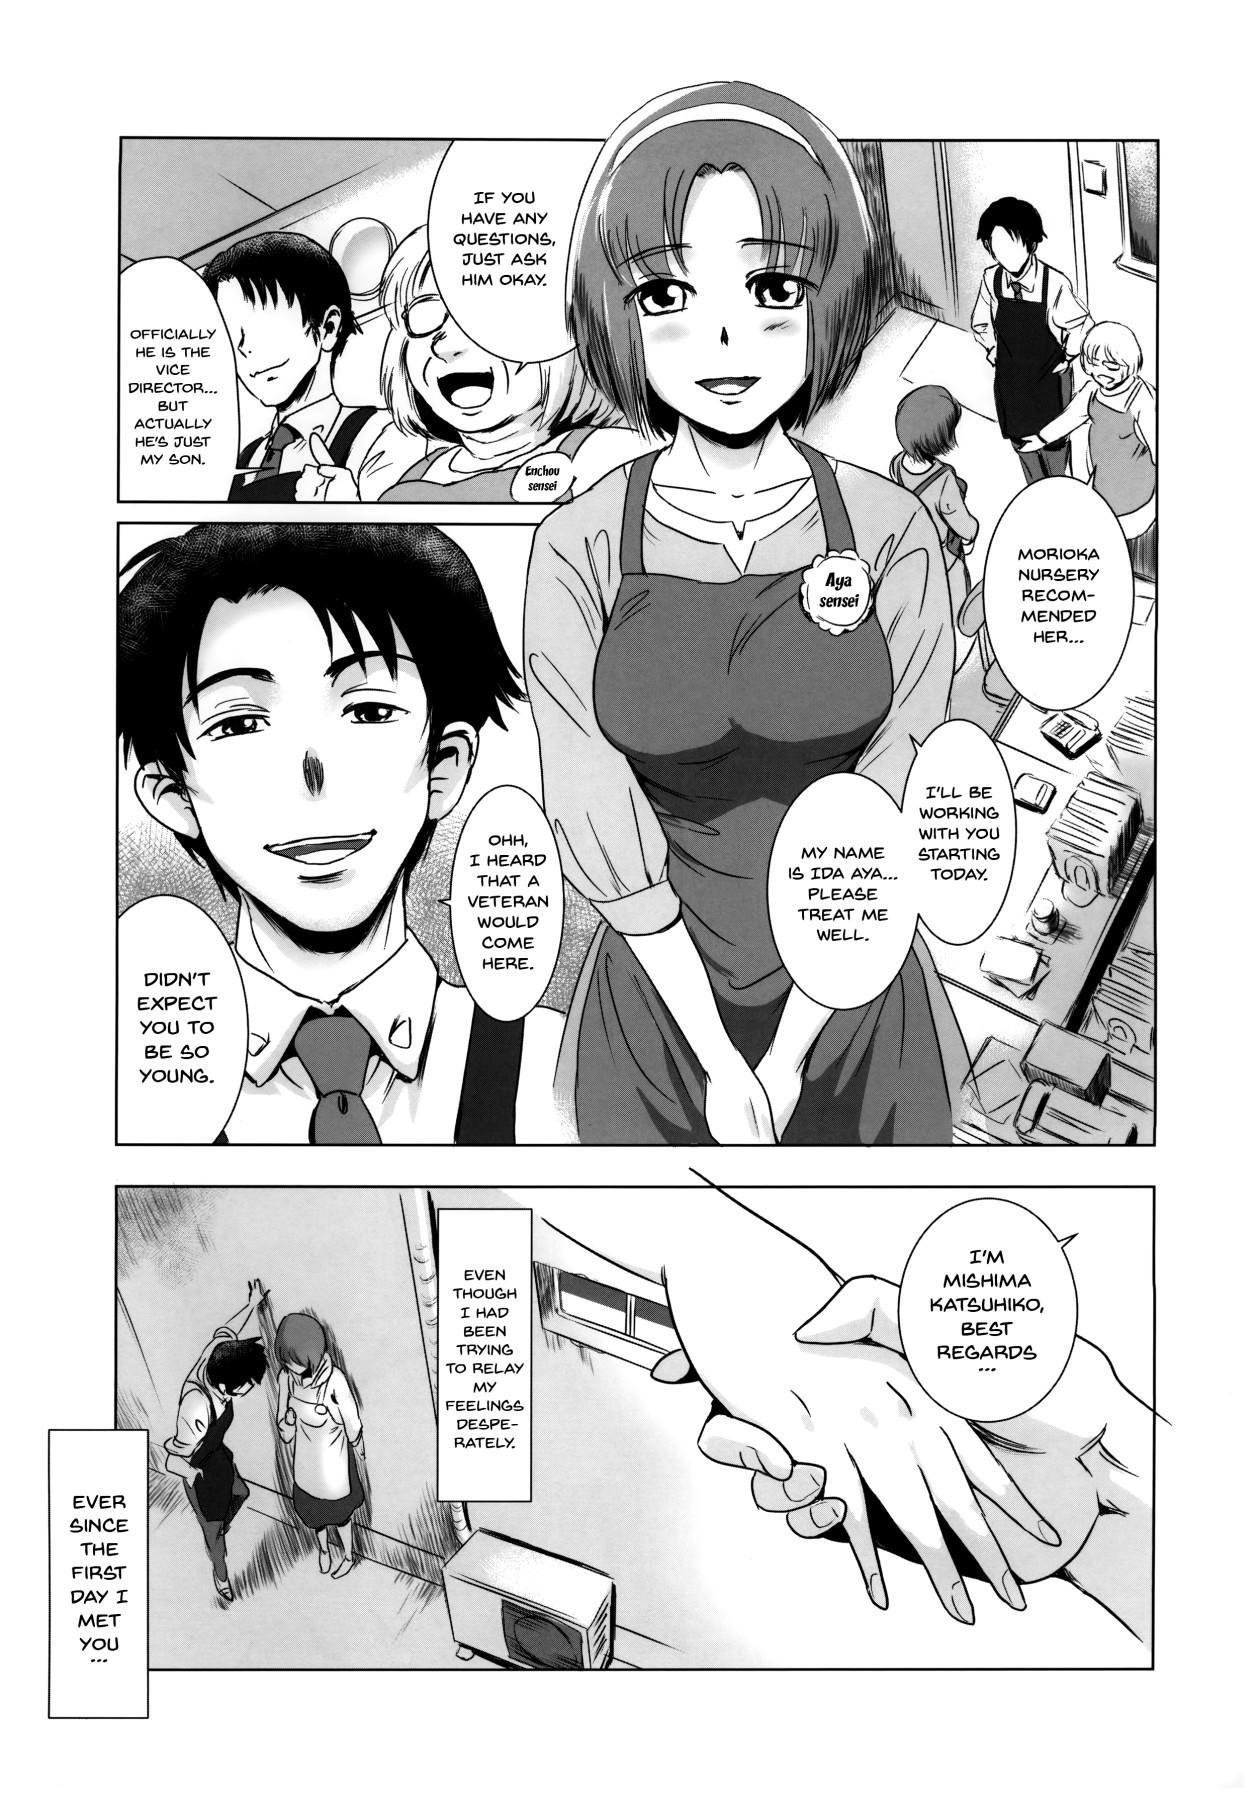 Jacking Story of the 'N' Situation - Situation#1 Kyouhaku - Original Hard Core Porn - Page 8